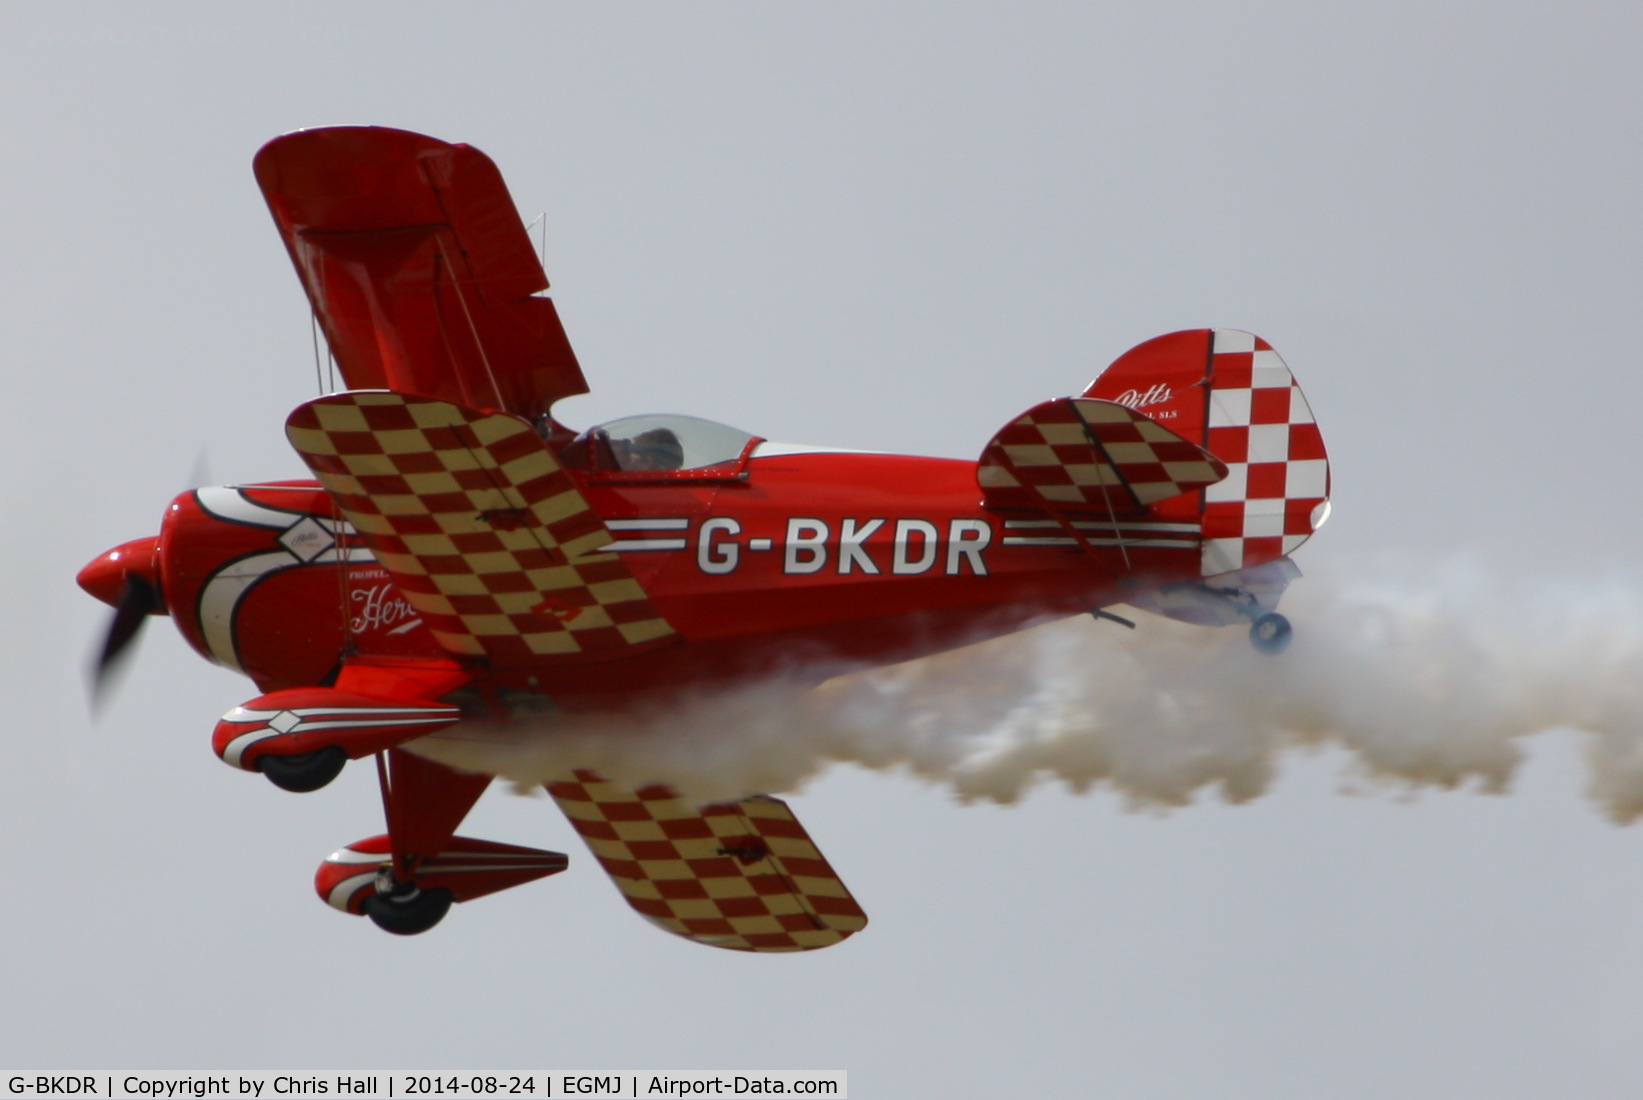 G-BKDR, 1982 Pitts S-1S Special C/N PFA 009-10654, at the Little Gransden Airshow 2014